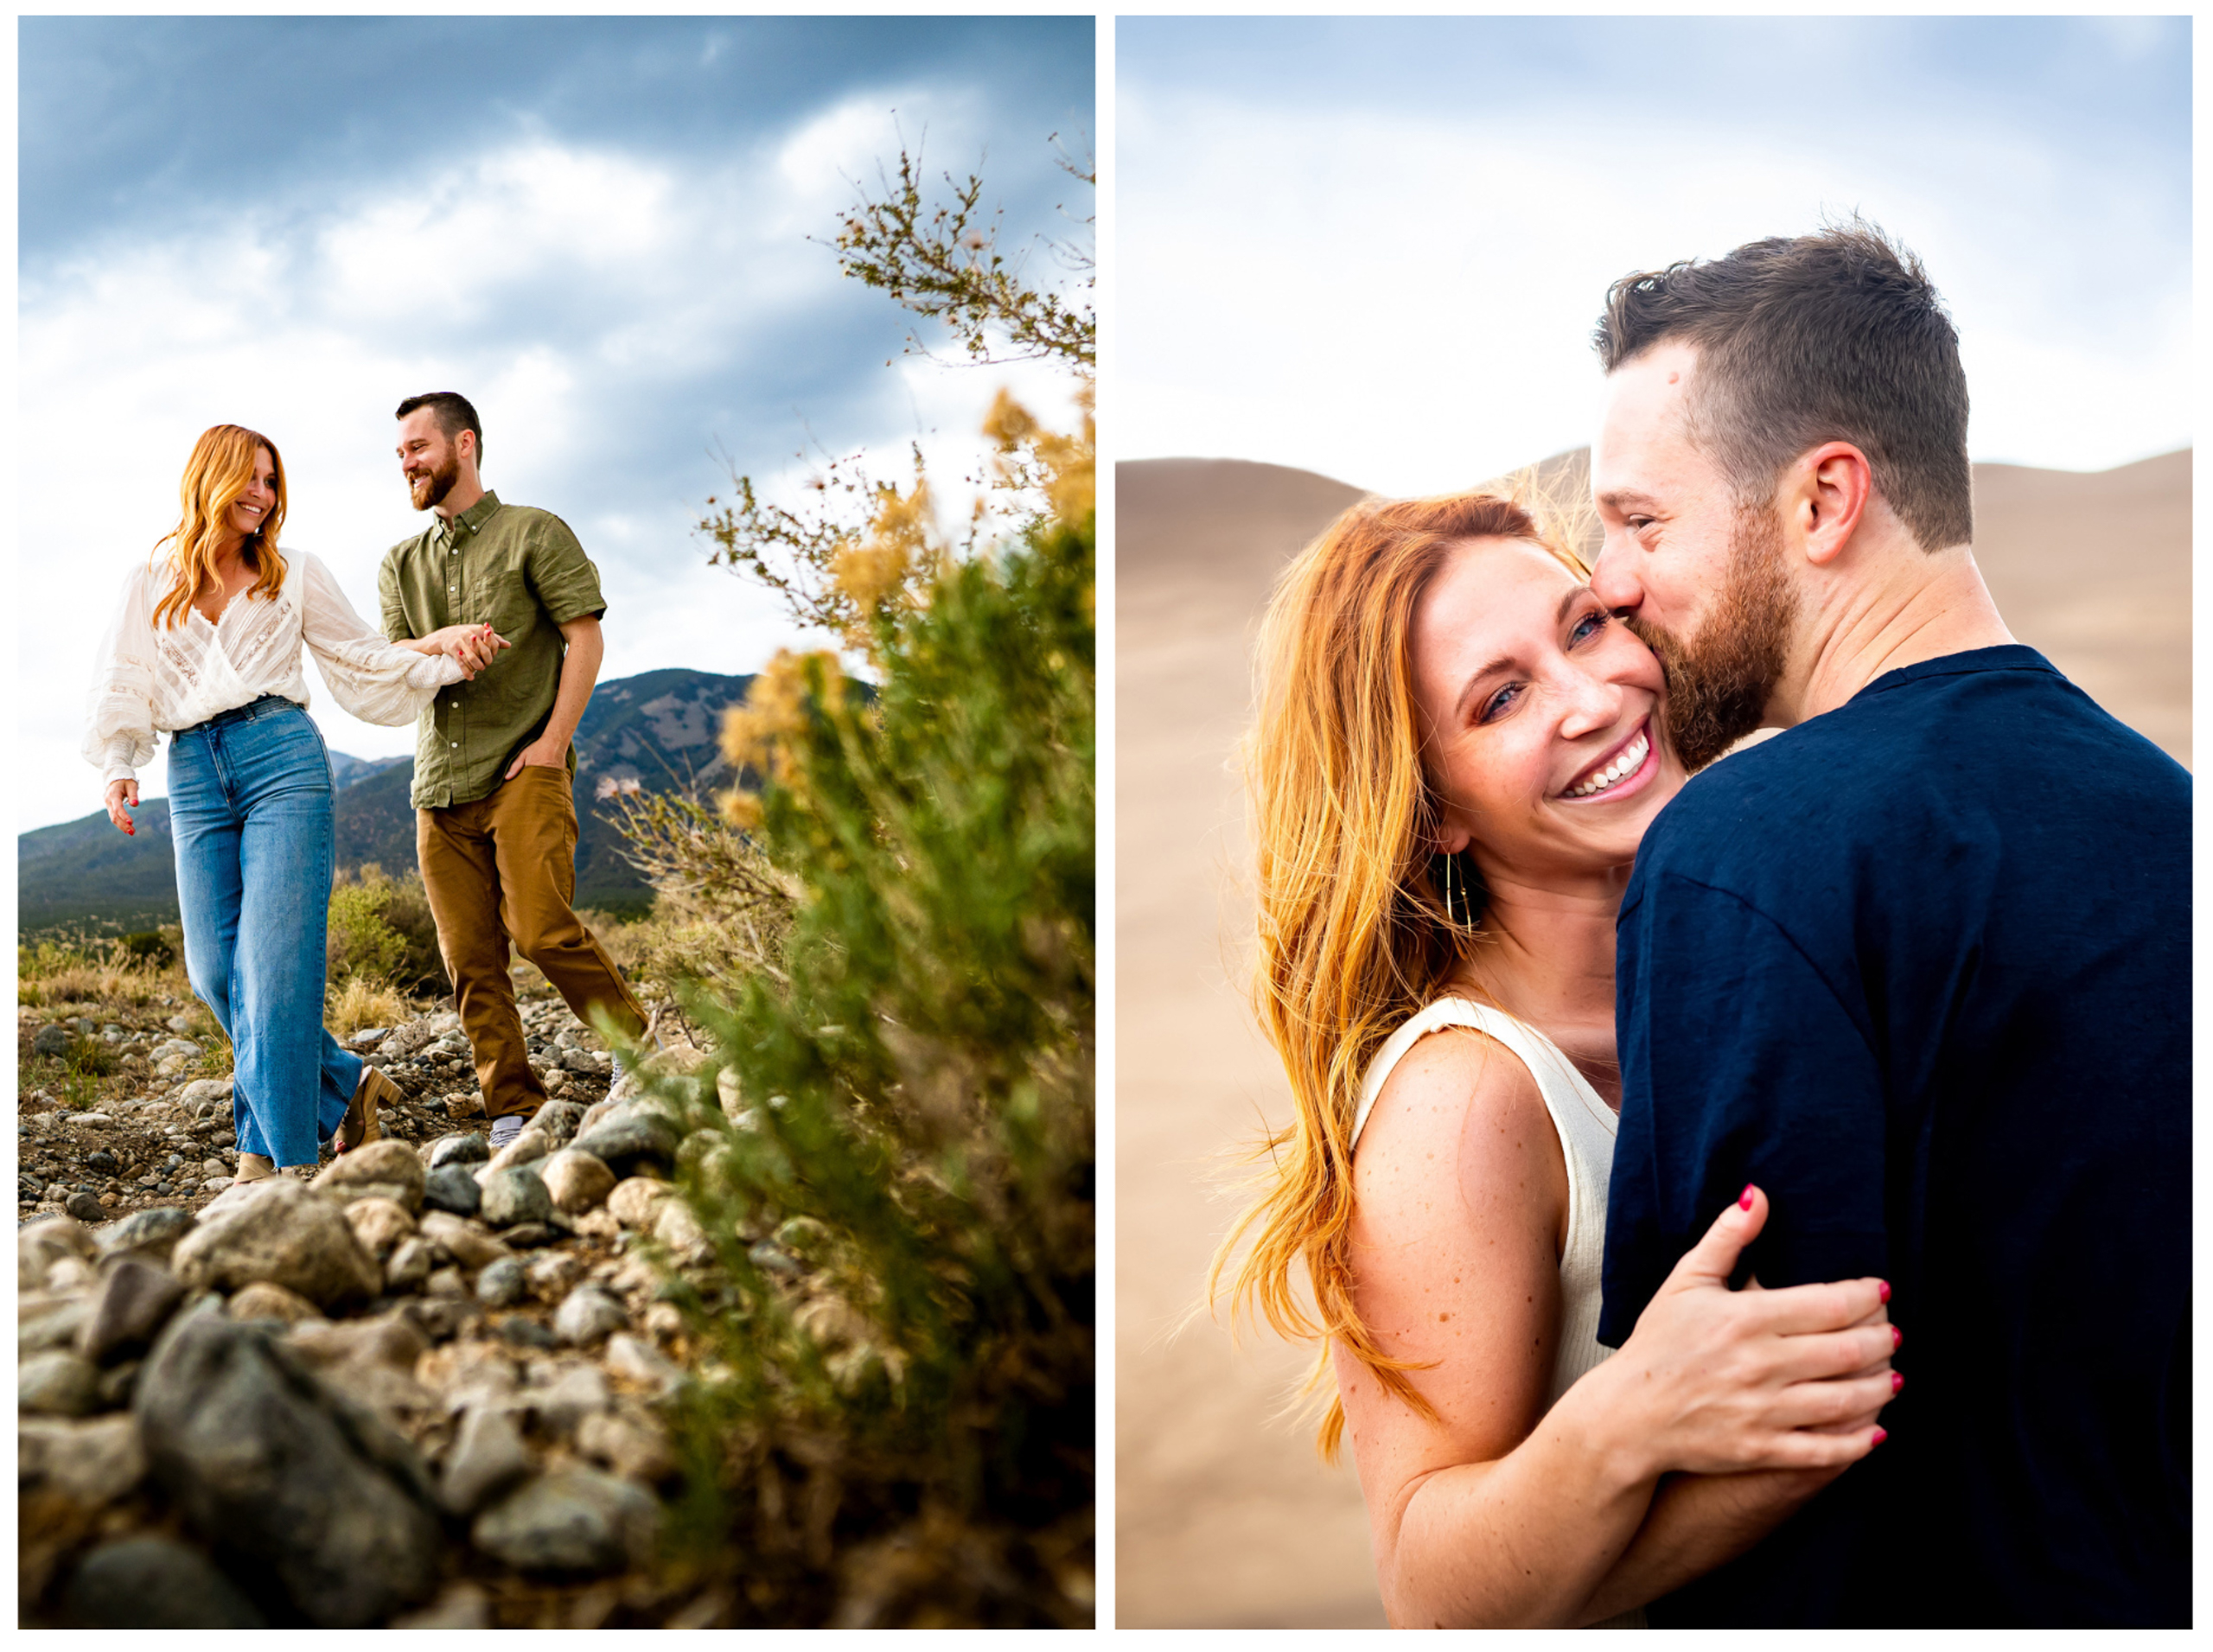 Engagement Photography Tips